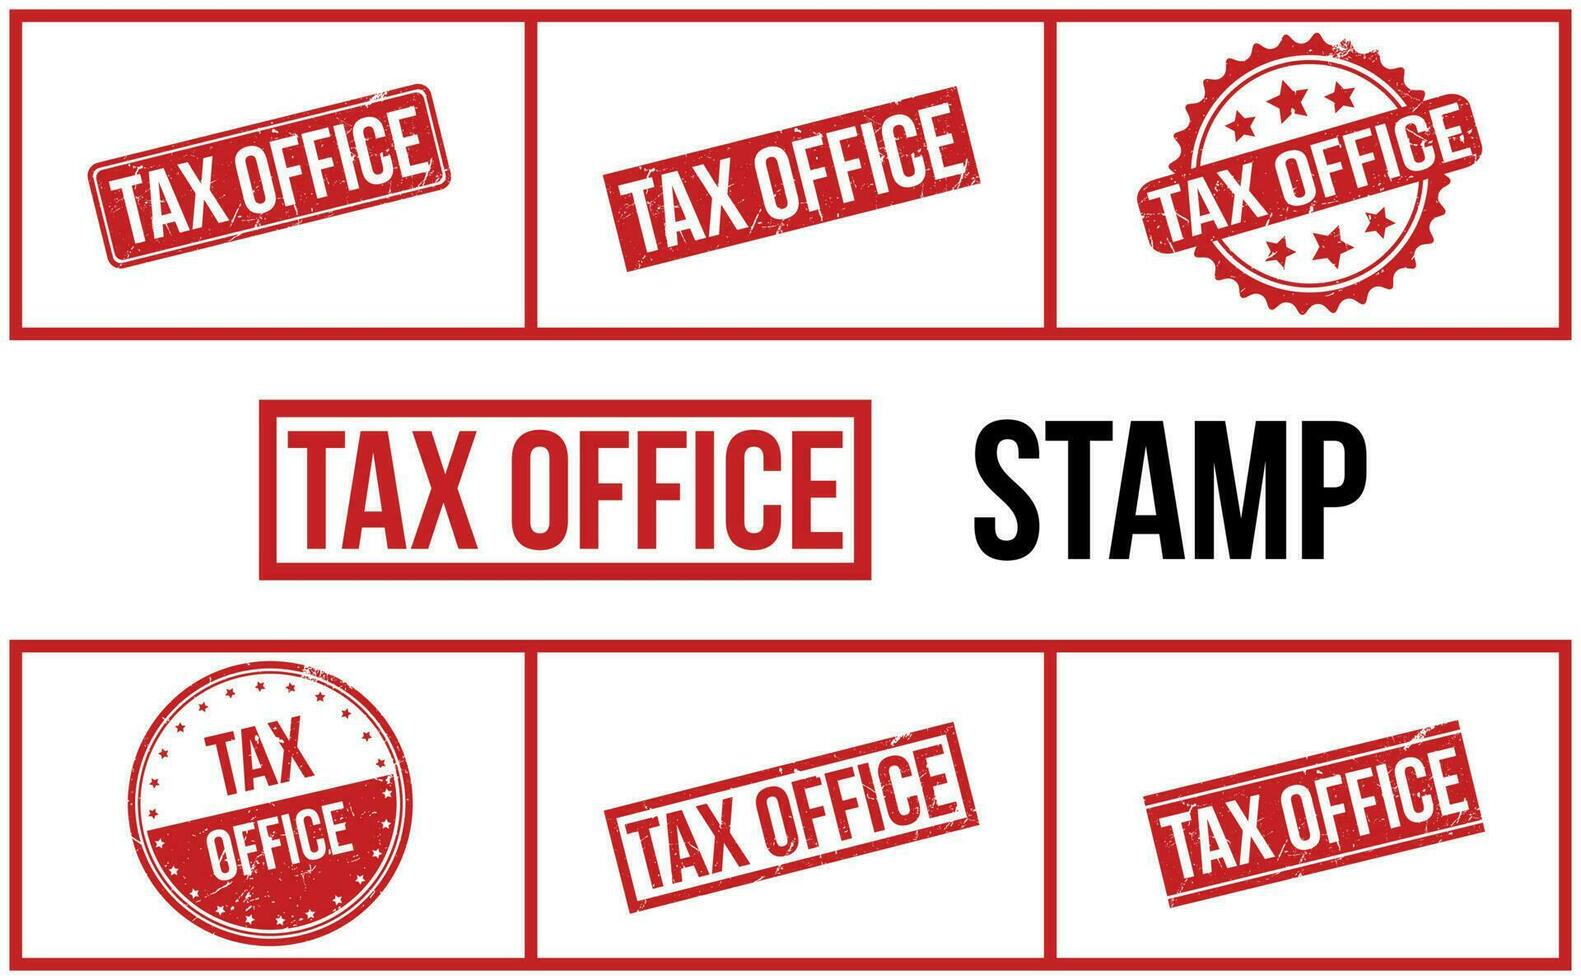 Tax Office Rubber Stamp Set Vector